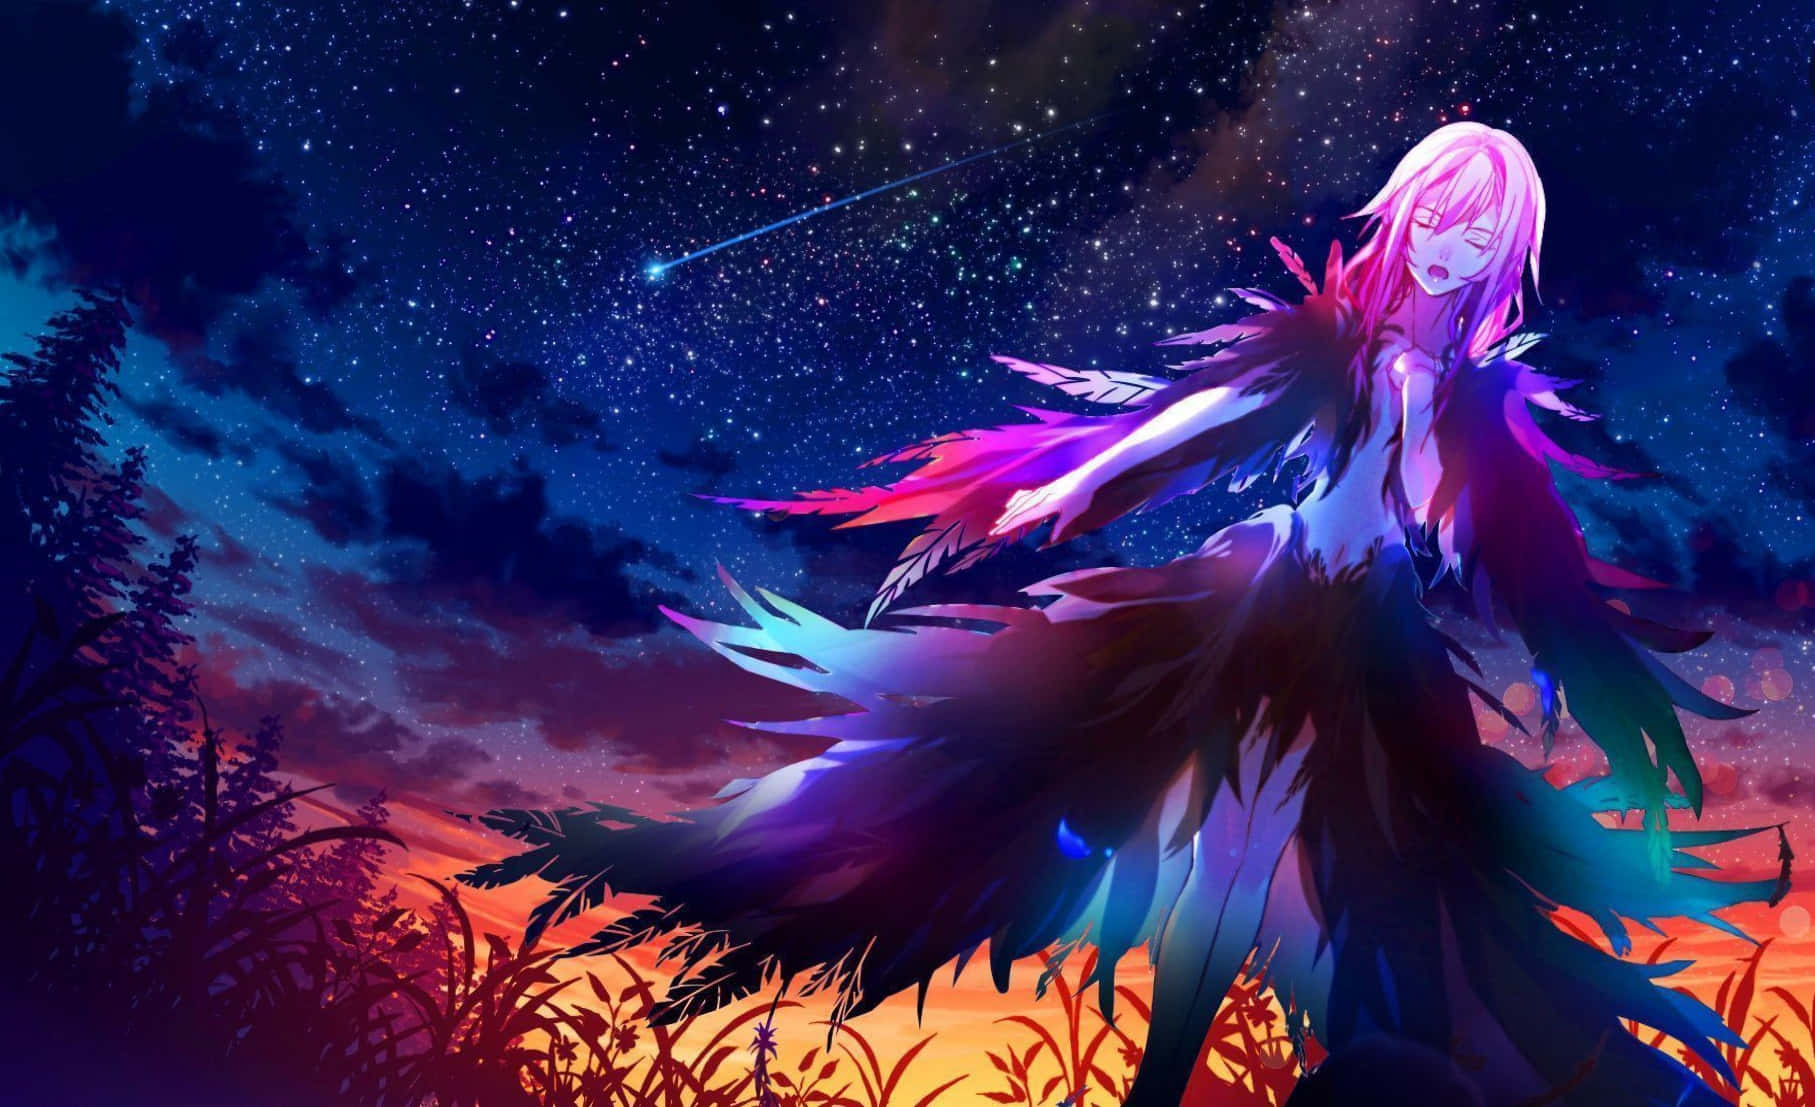 Awoken by a Guilty Crown